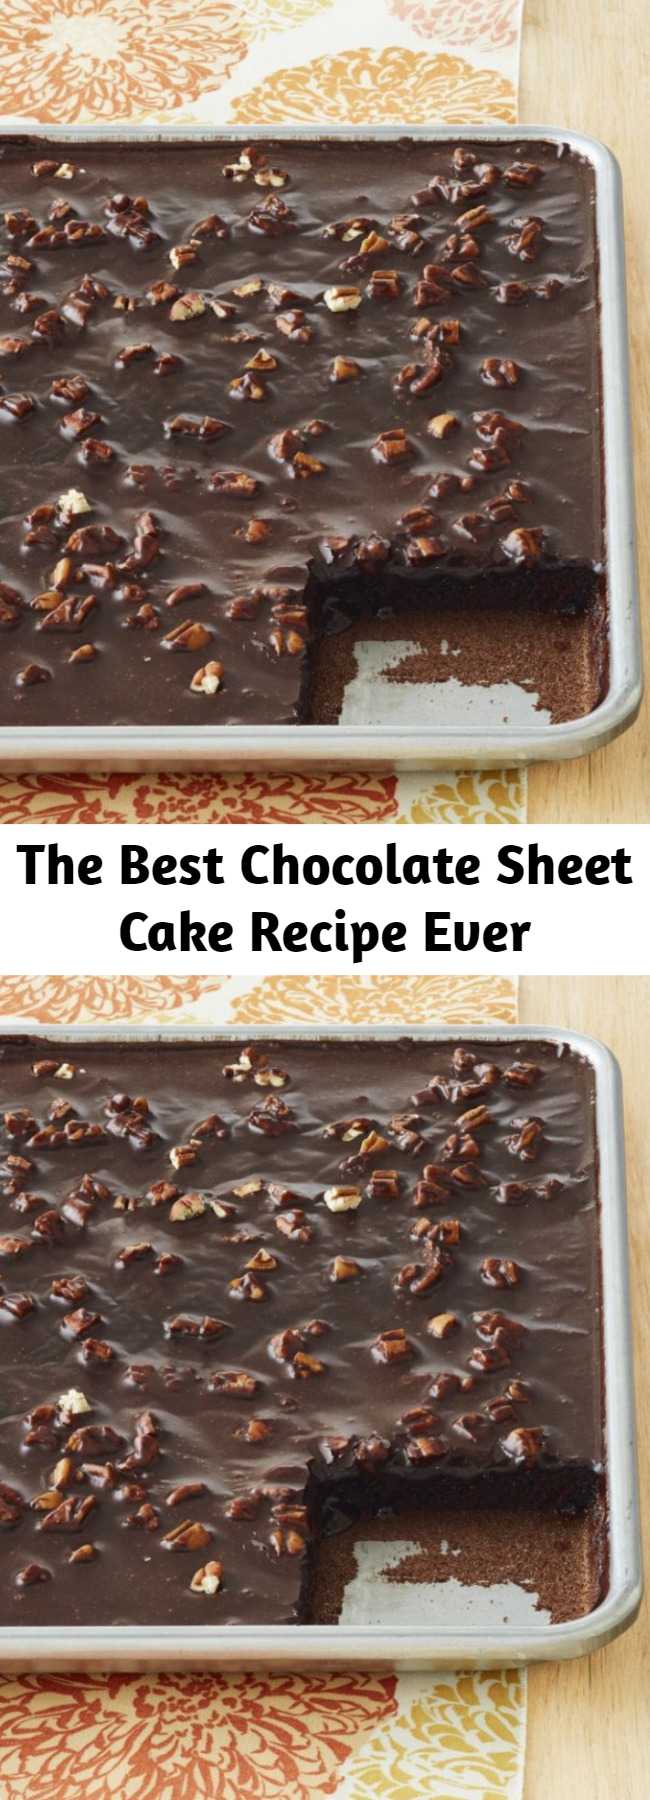 The Best Chocolate Sheet Cake Recipe Ever - It’s moist beyond imagination, chocolatey and rich like no tomorrow, and 100% of the time, causes moans and groans from anyone who takes a bite.